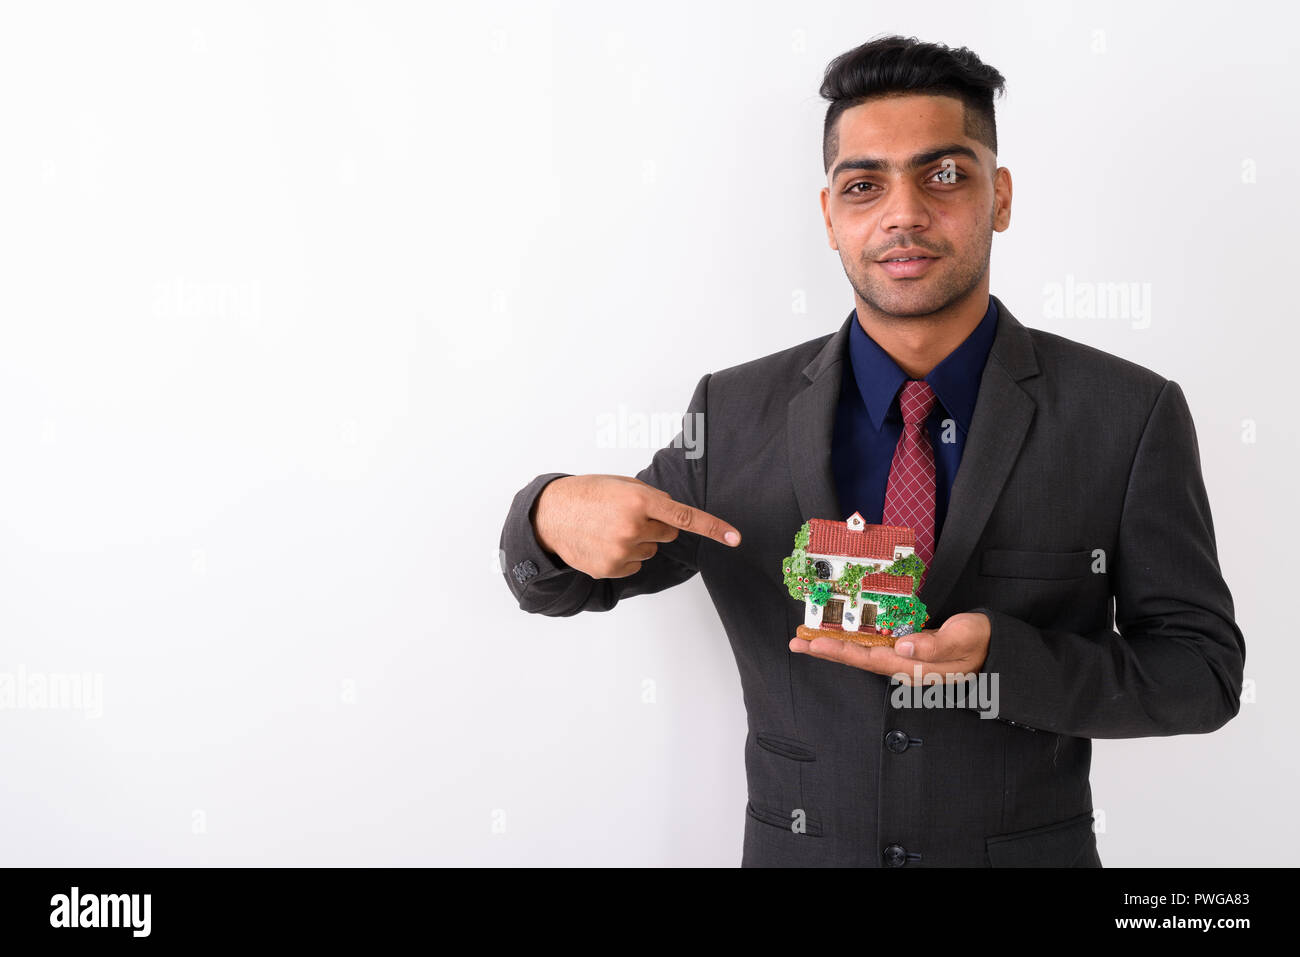 Young Indian businessman wearing suit against white background Banque D'Images